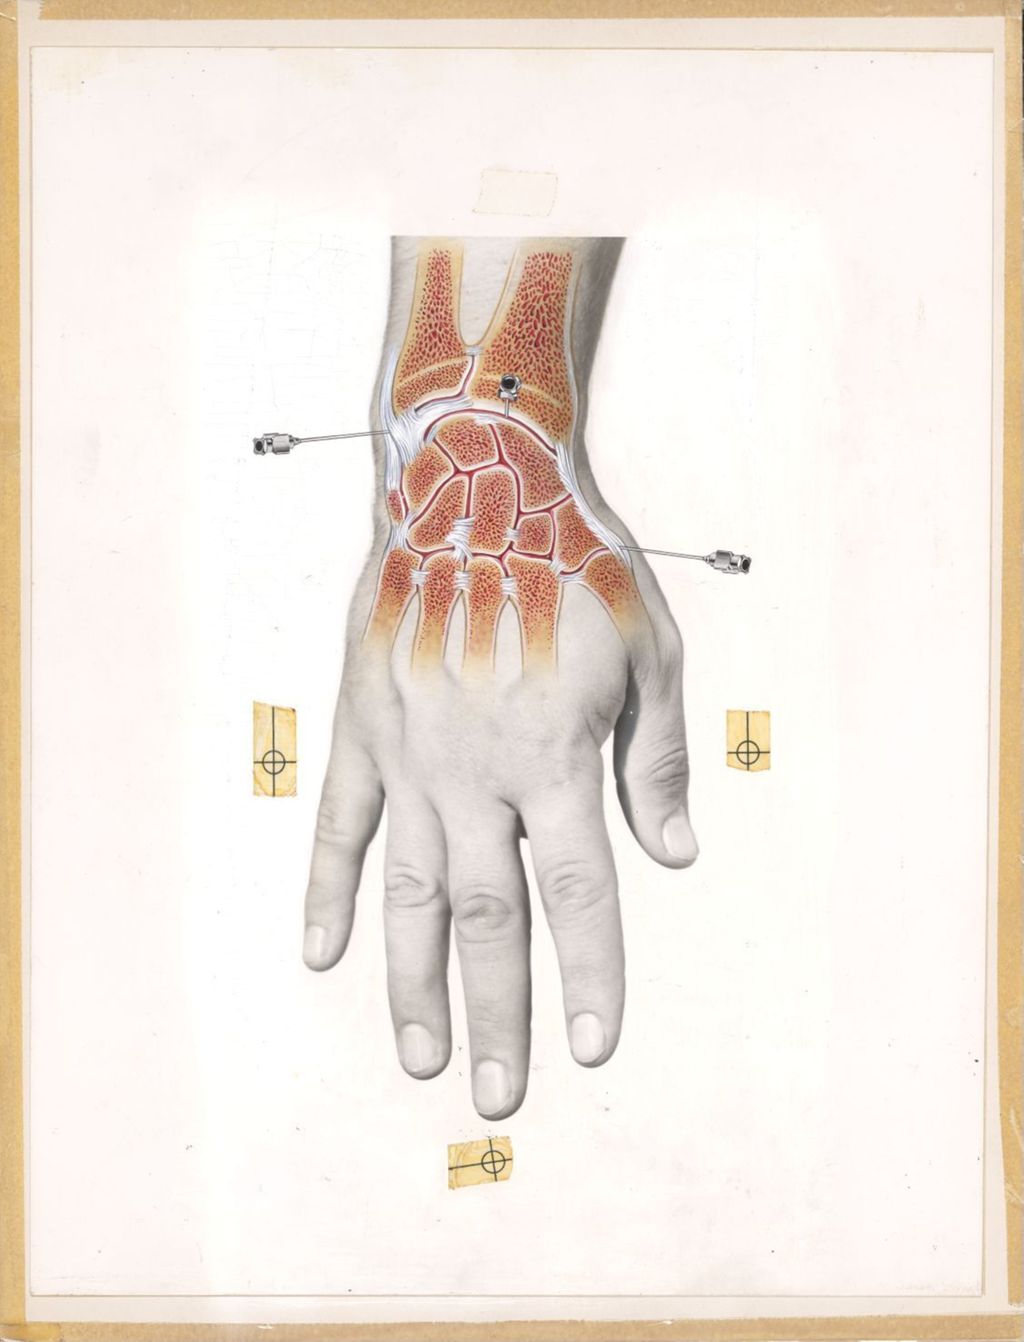 Miniature of Artwork of wrist bones and tendons with needles being inserted, painted over photograph of man's hand